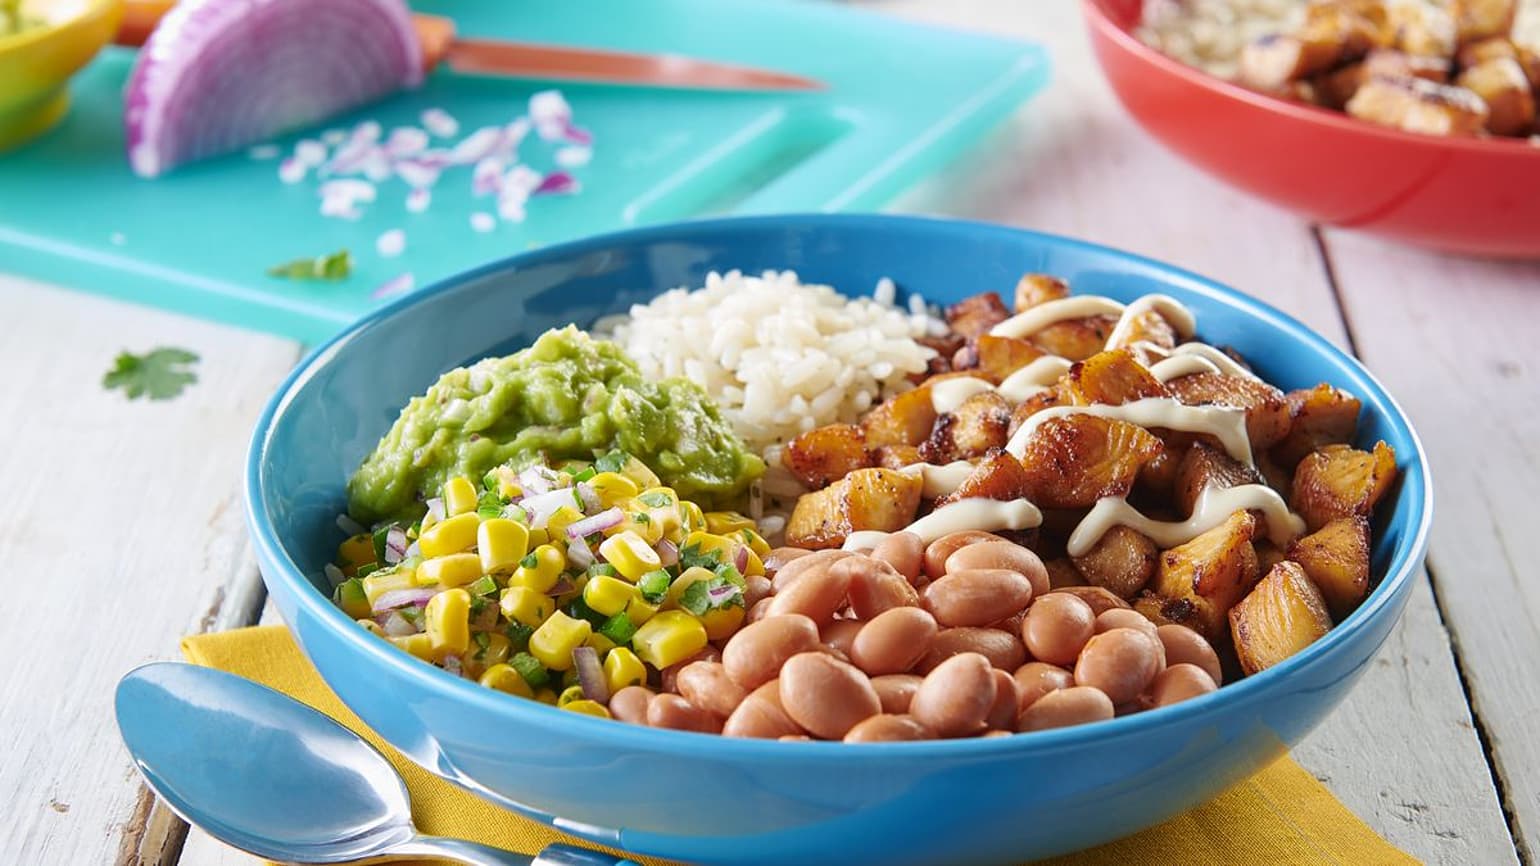 Homemade Chipotle Bowl with Chicken - Food Dolls